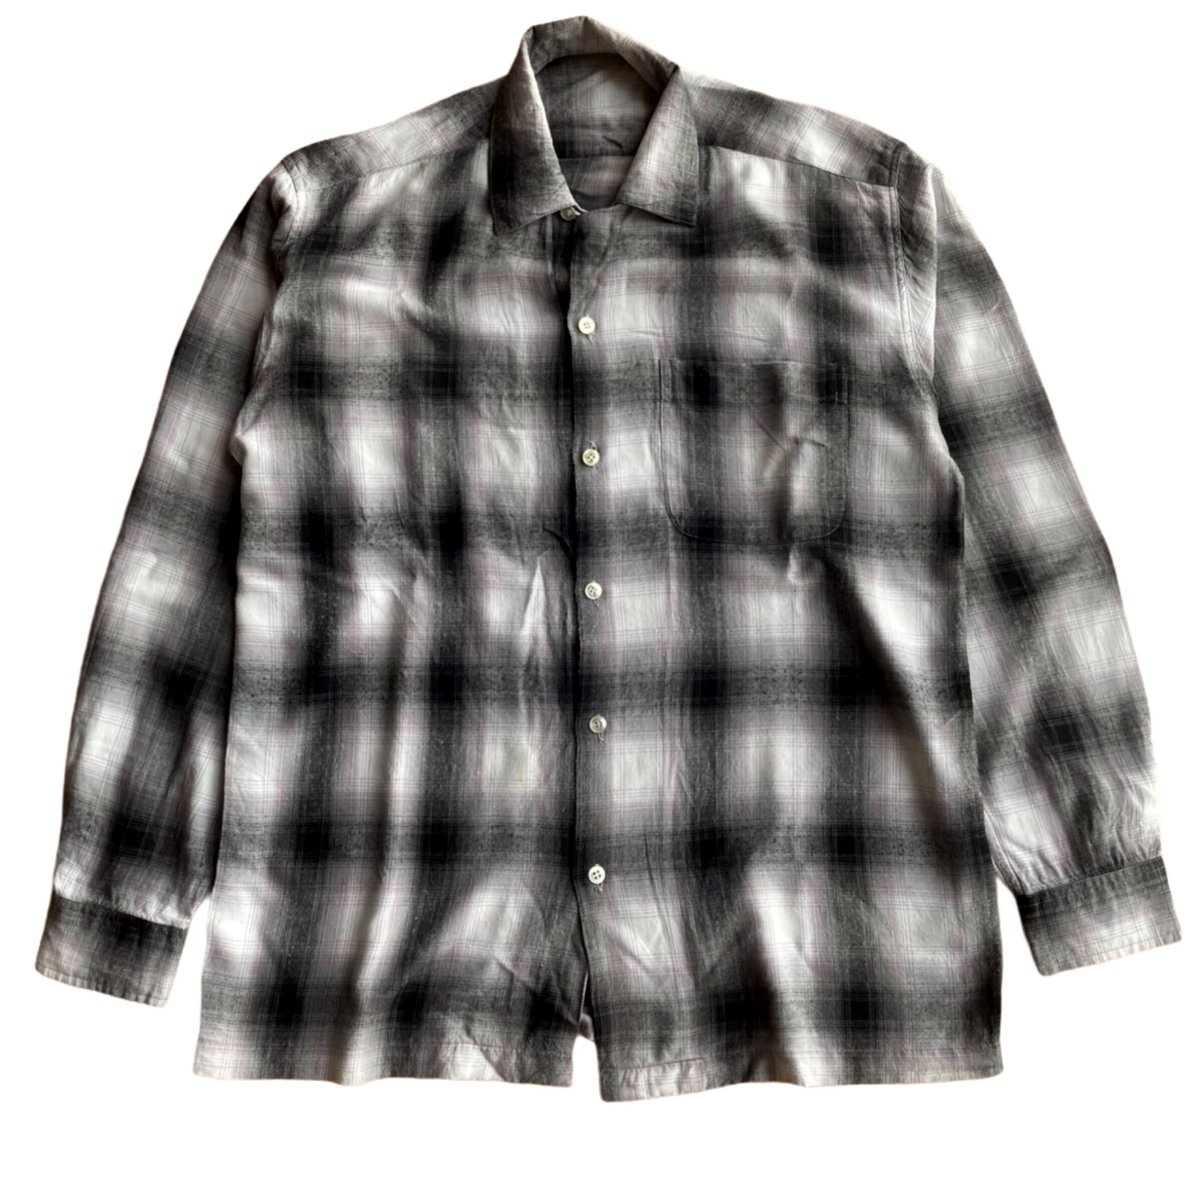 60s <unknown> Vintage rayon ombre shadow check shirt